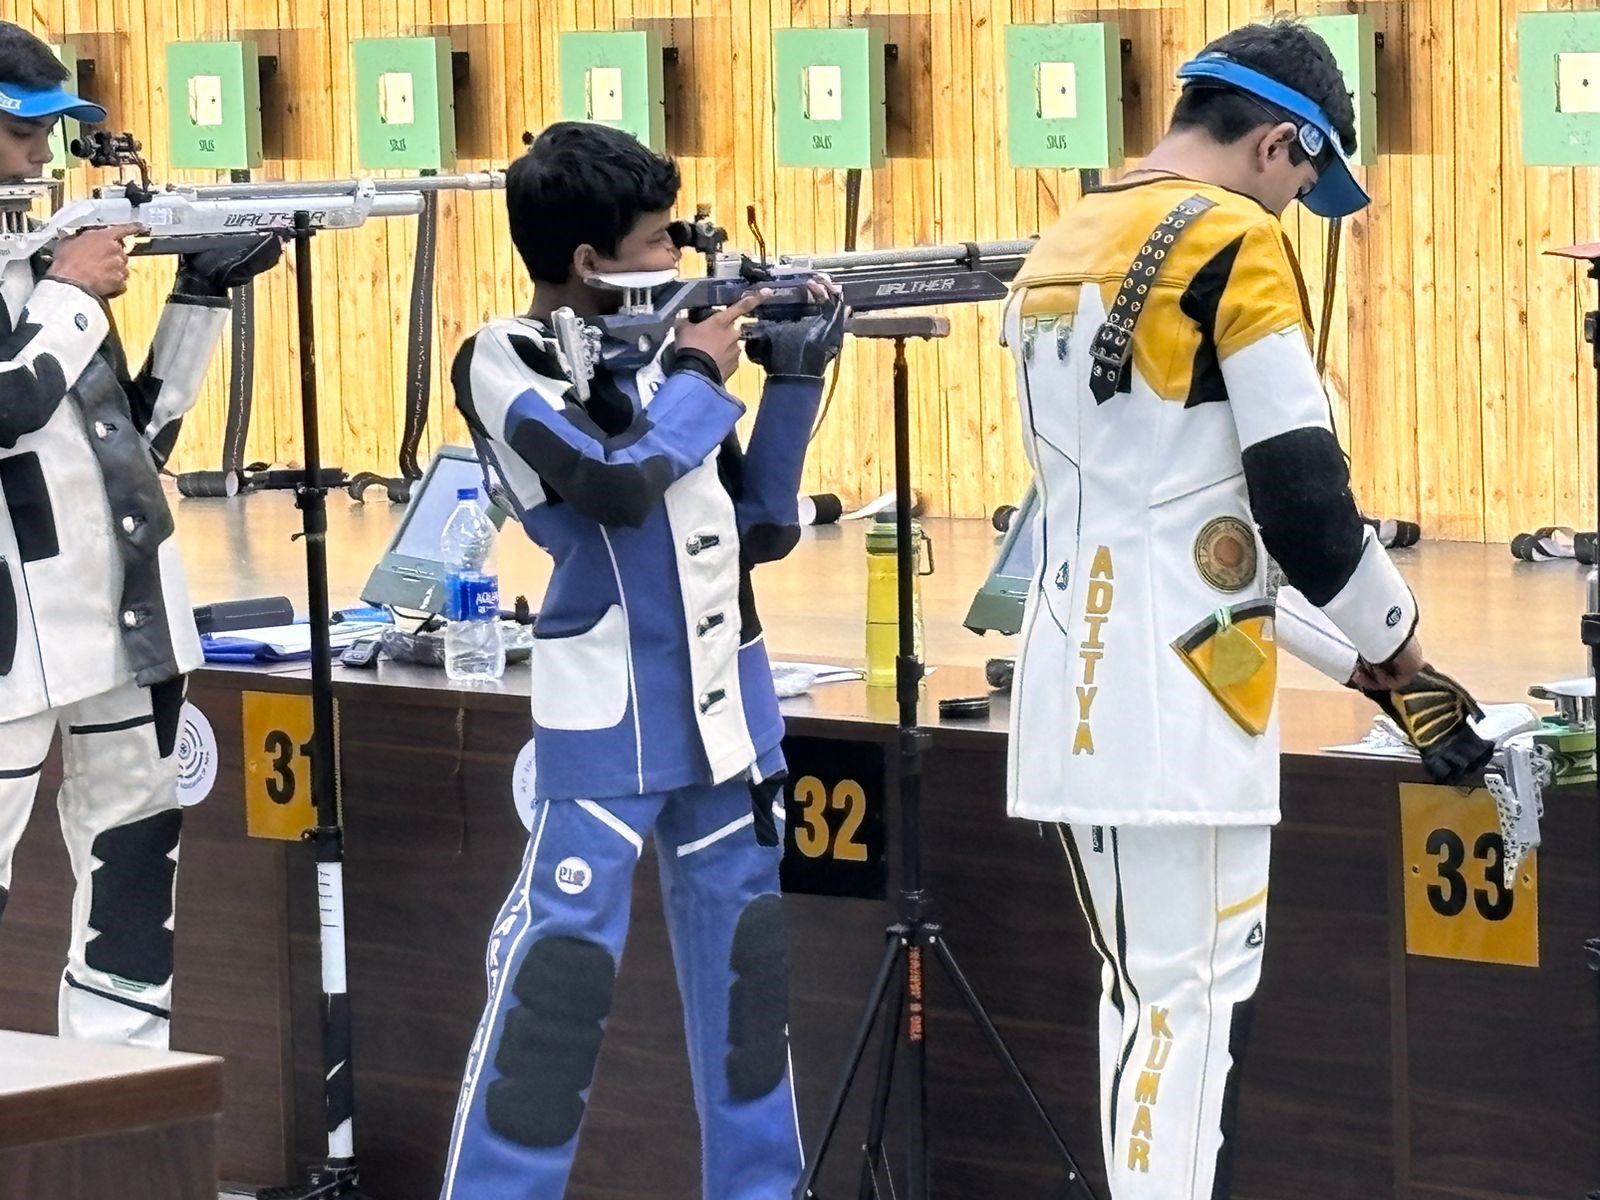 Yug Jariwala shot his PERSONAL BEST of 607.5 at the ongoing All India 22nd KUMAR SURENDRA SINGH MEMORIAL SHOOTING CHAMPIONSHIP 2024, BHOPAL from 8th June – 10th June 2024 . He qualified for the Indian Team Trials in Sub-Youth category.